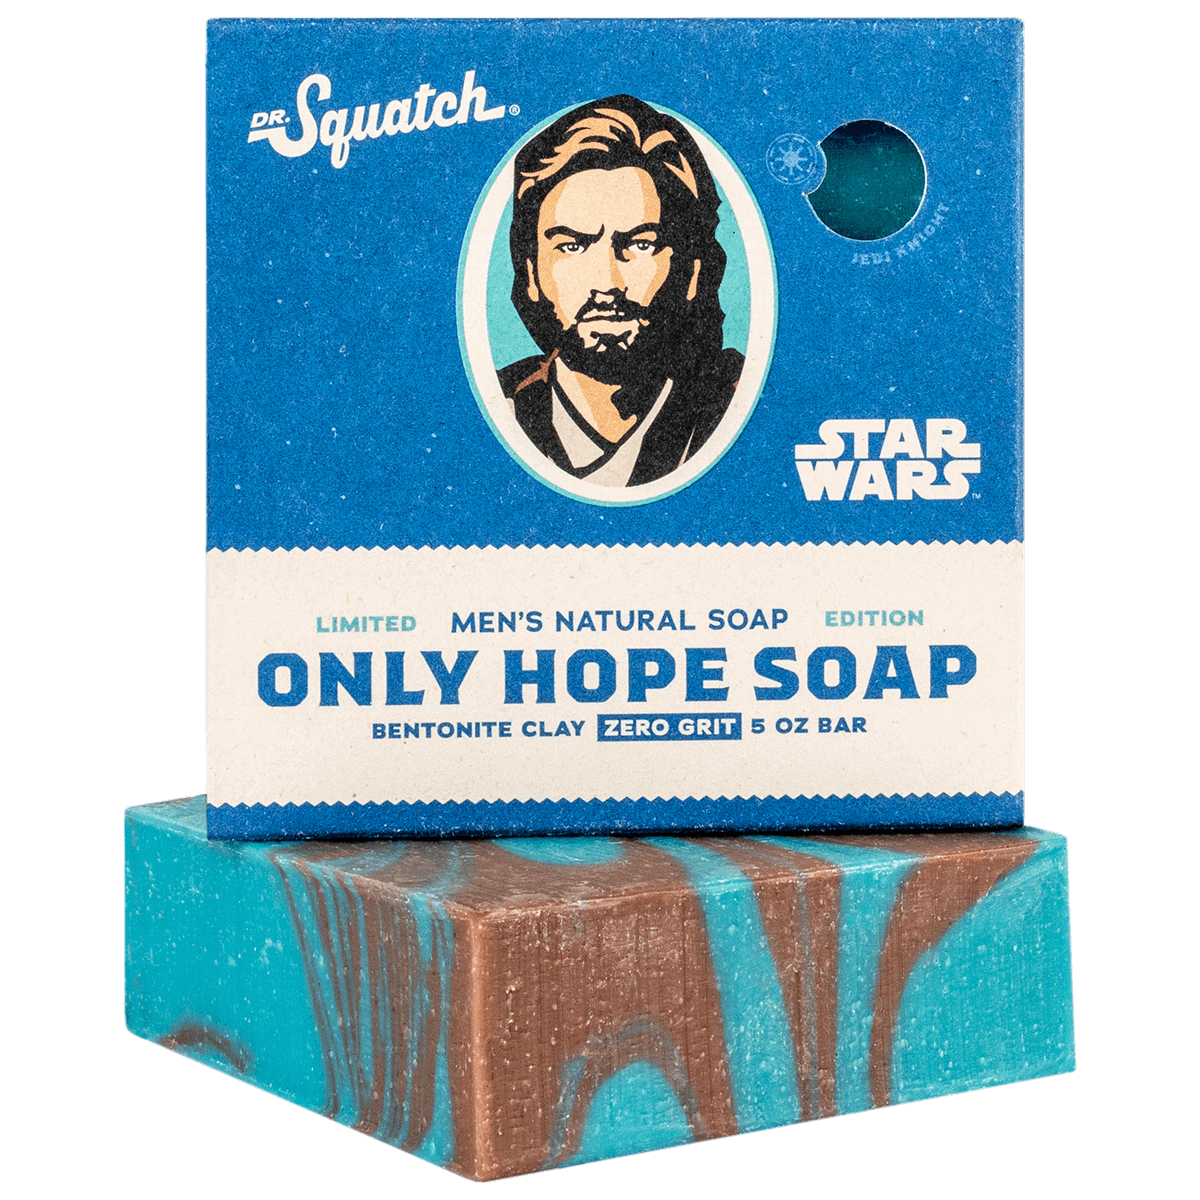 Dr. Squatch - These bars won't be here forever, make sure to take advantage  of this #StarWars inspired soap while you can, Click the link: https:// drsquatch.com/pages/star-wars